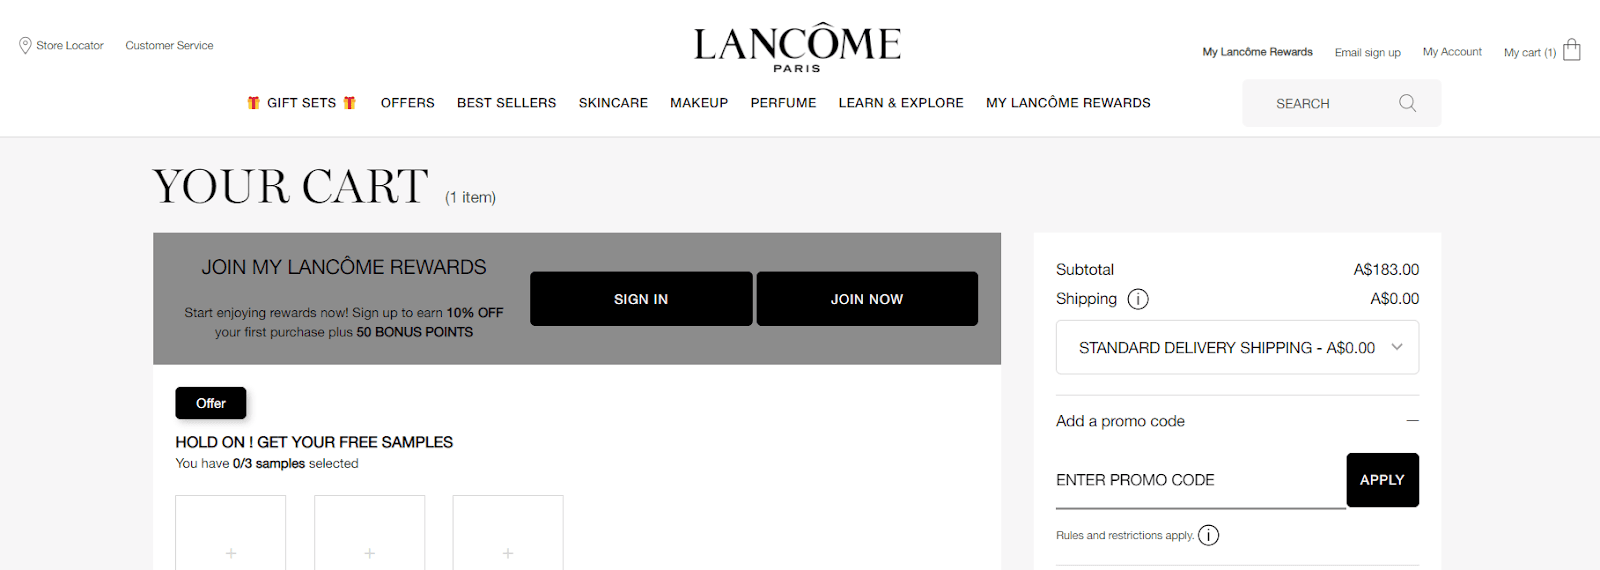 How to use Lancome promo code step 4